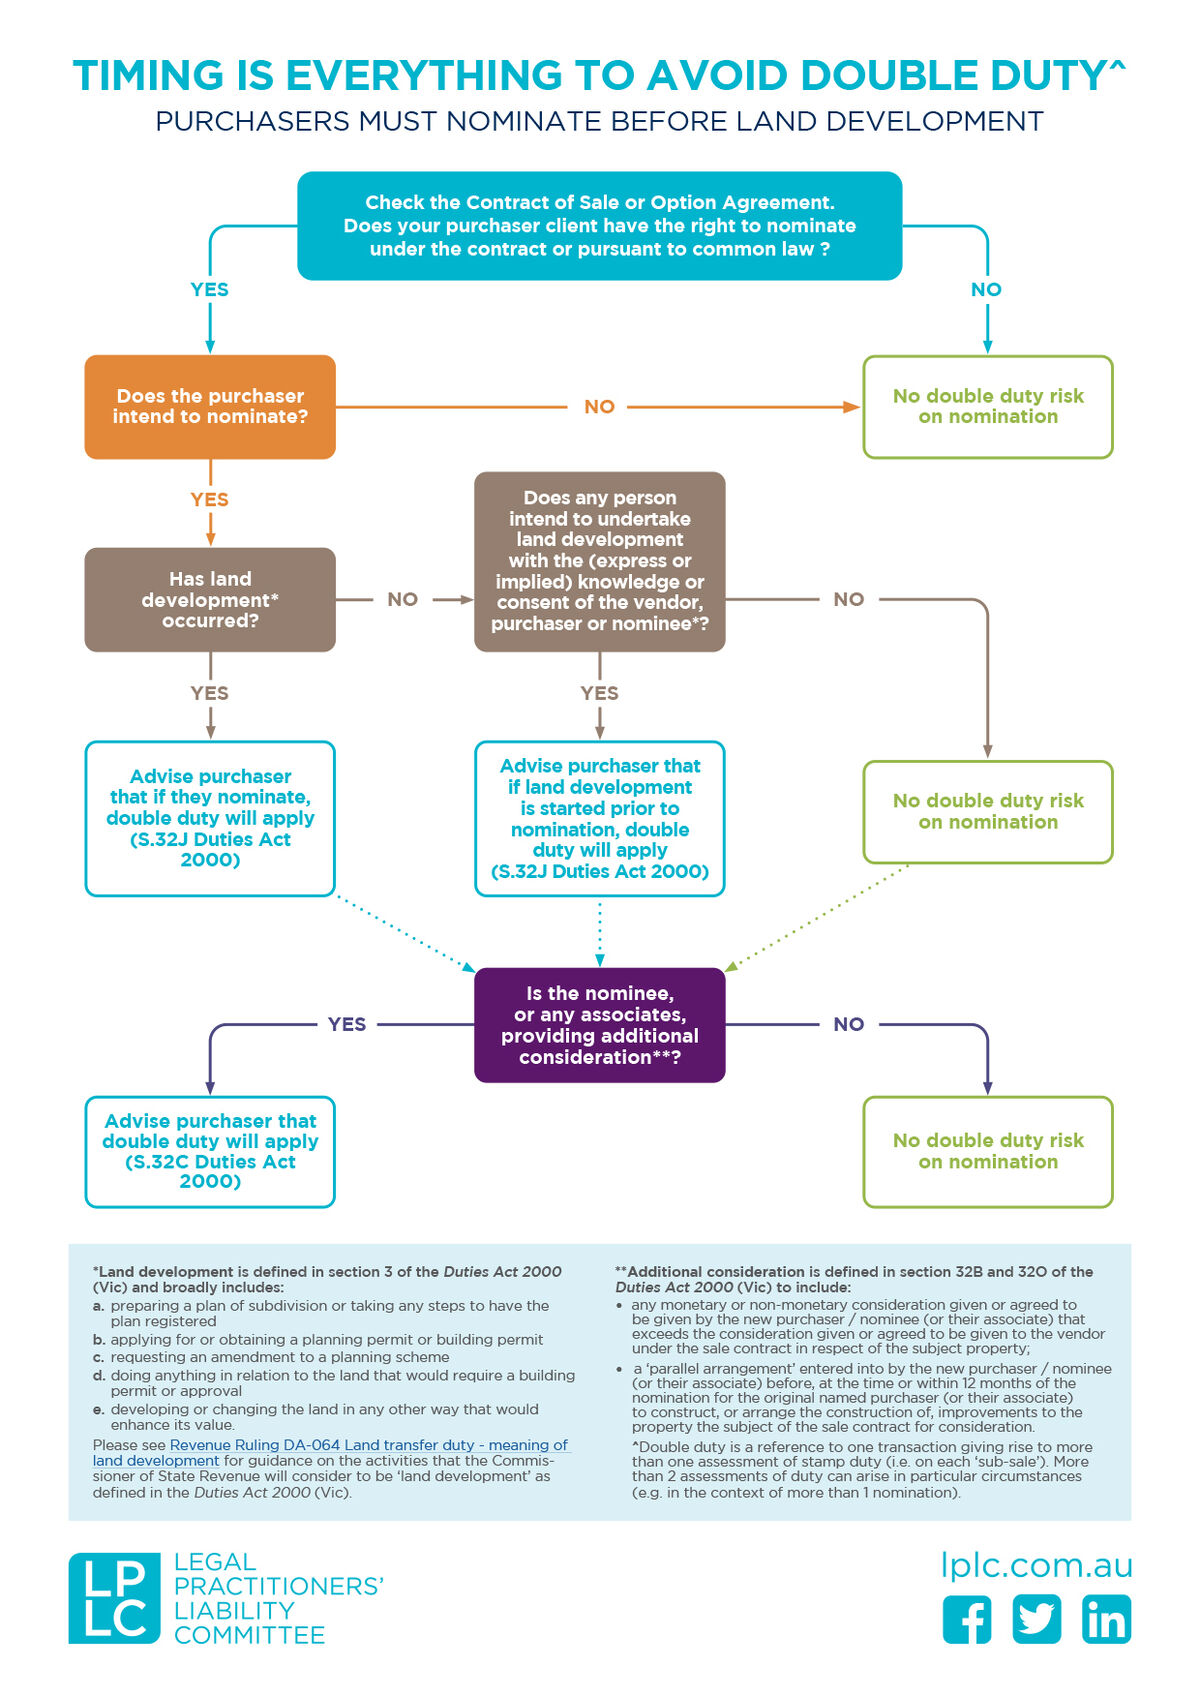 Timing is everything to avoid double duty flowchart UPDATED V1 1 Sept21